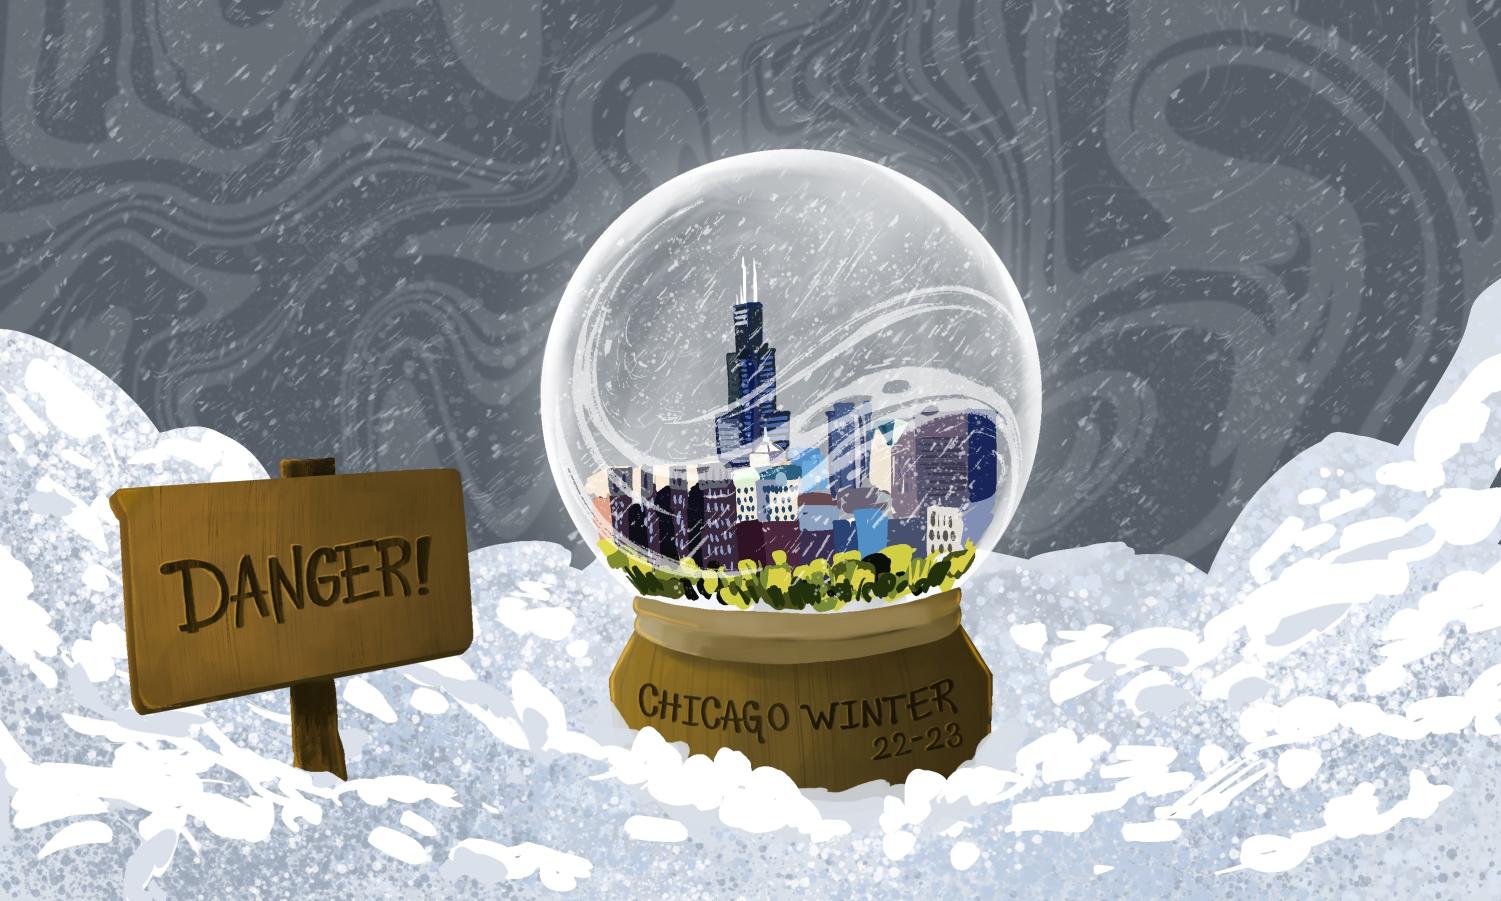 Snow+globe+next+to+a+%E2%80%9CDanger%21%E2%80%9D+sign+and+containing+a+snowy+downtown+Chicago.